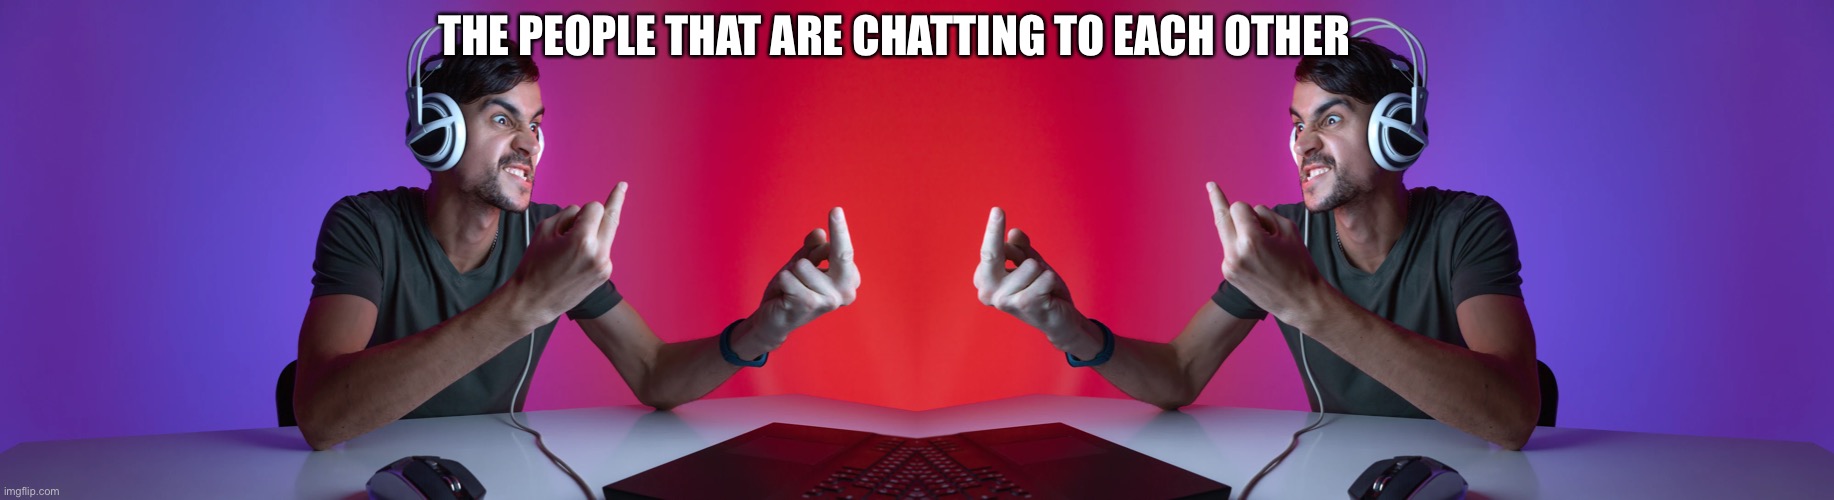 THE PEOPLE THAT ARE CHATTING TO EACH OTHER | made w/ Imgflip meme maker